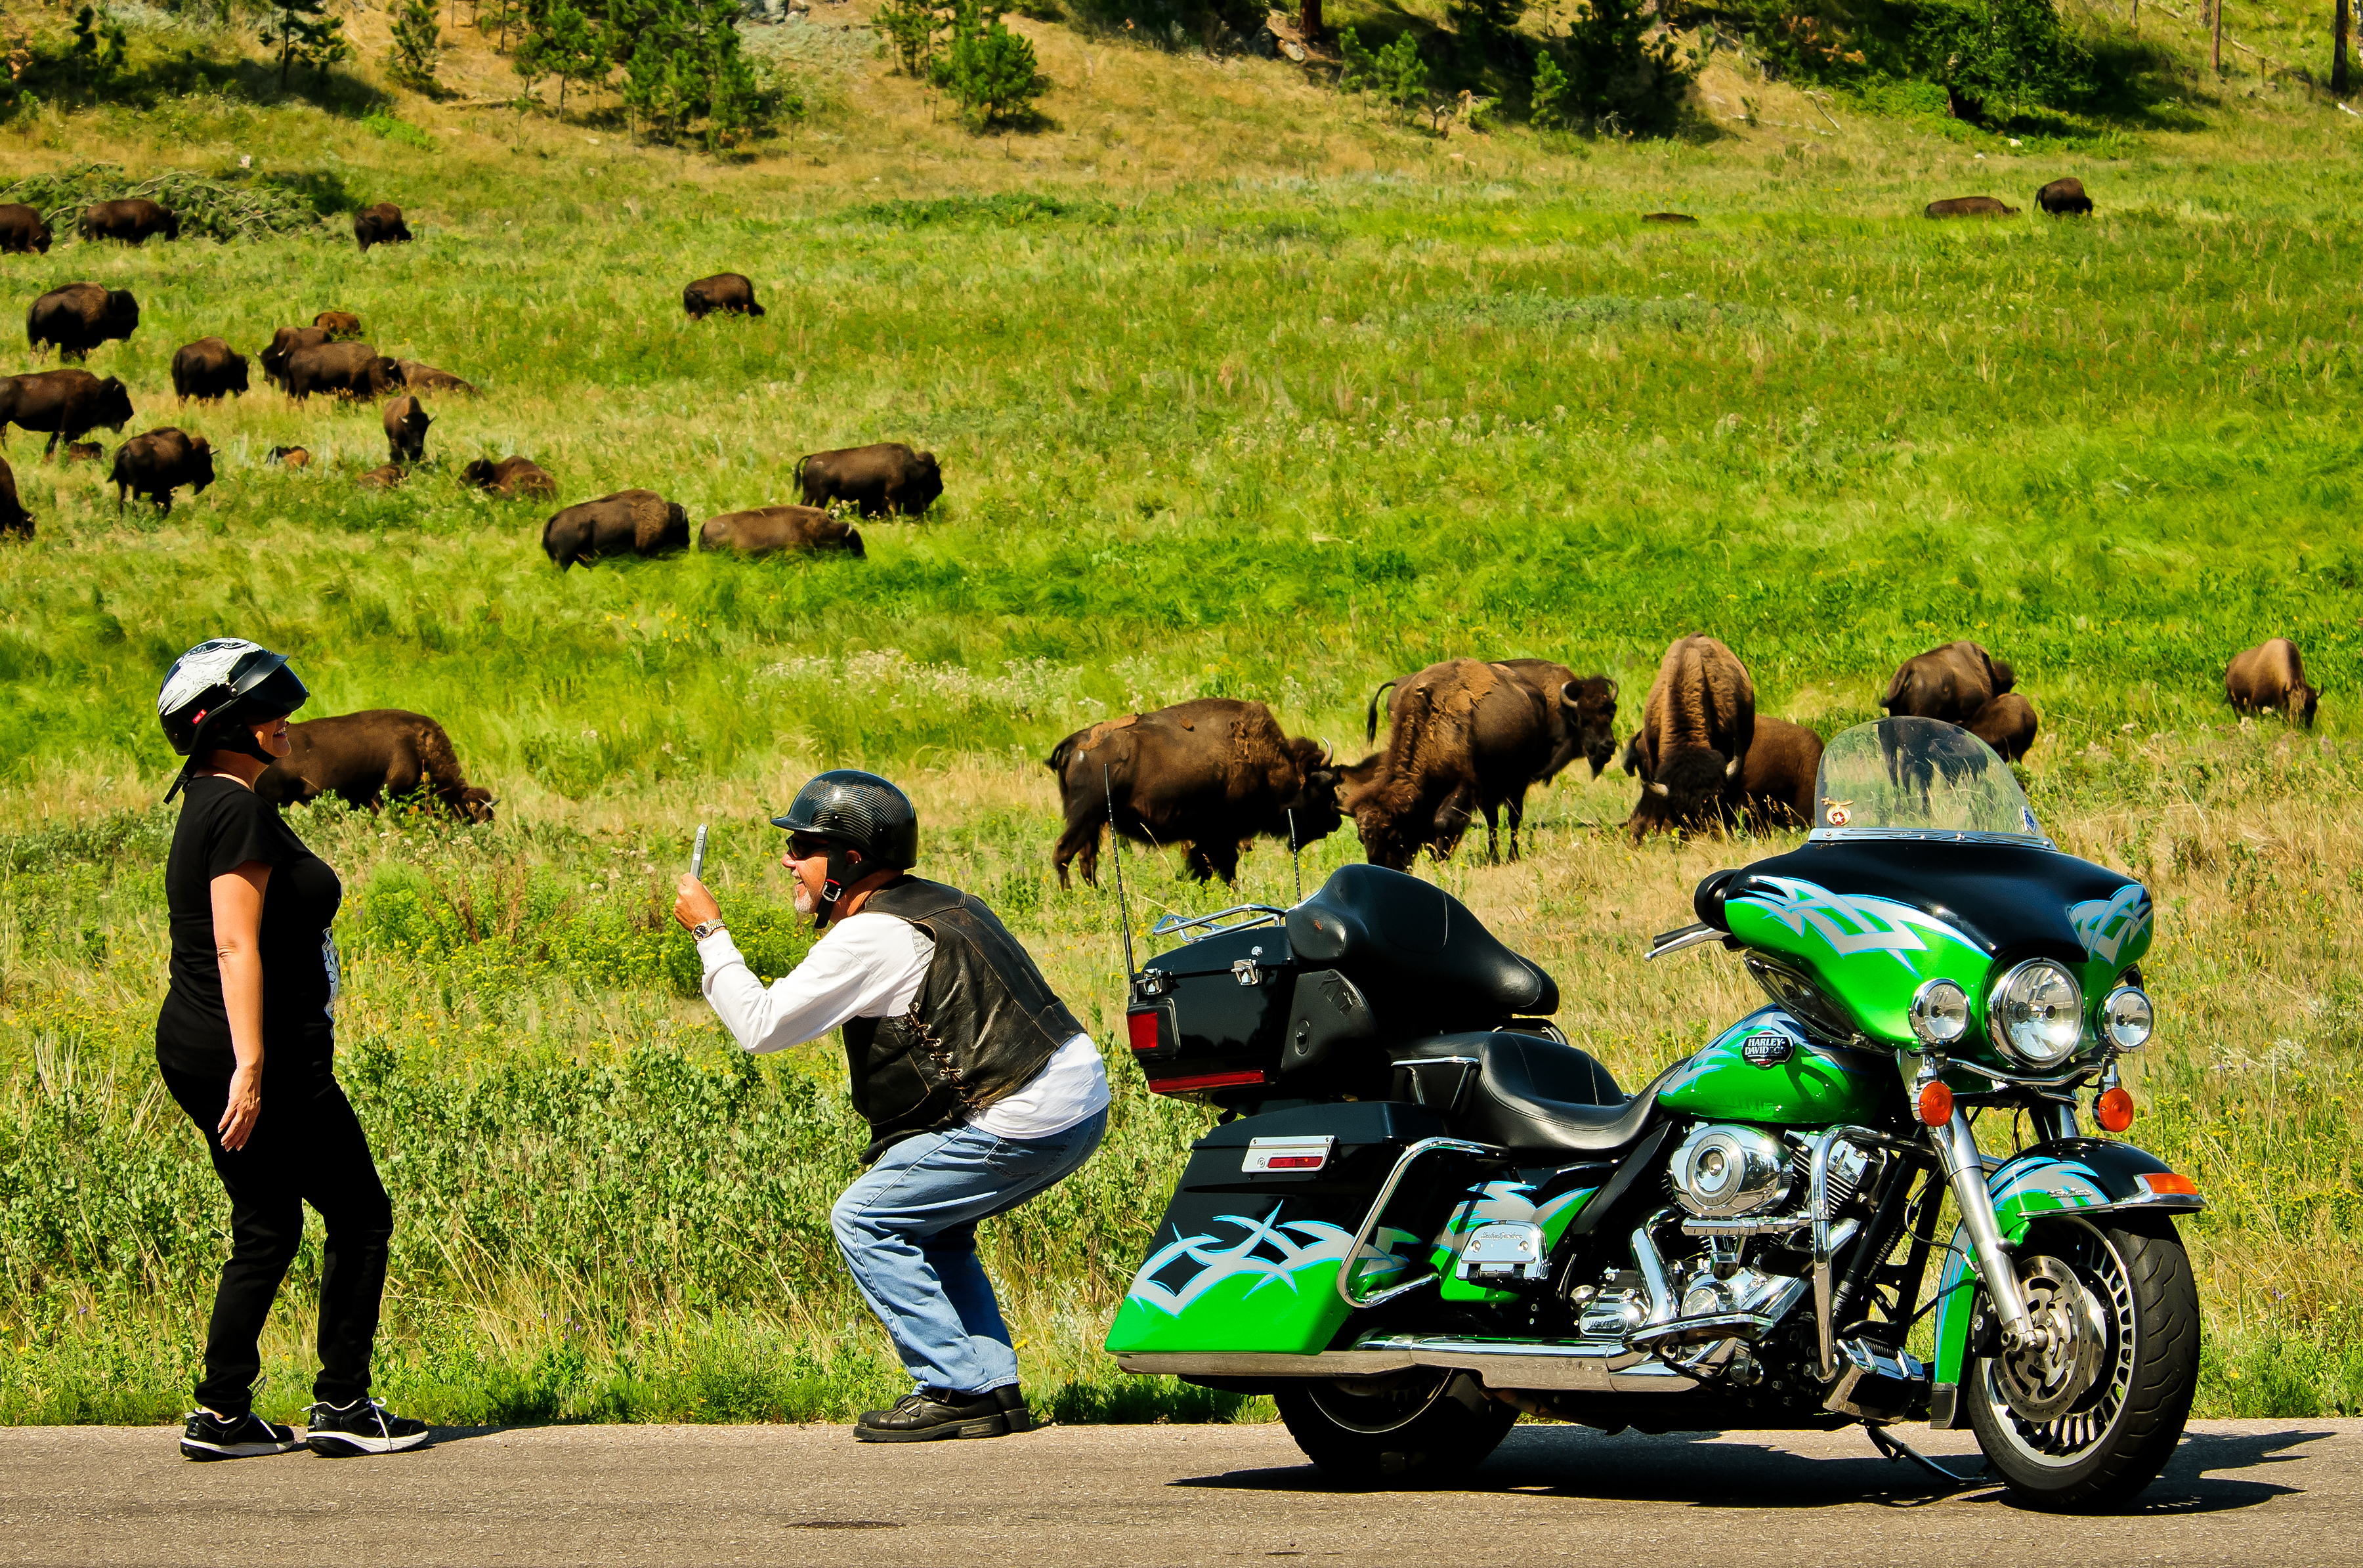 Do not approach wildlife in Custer State Park